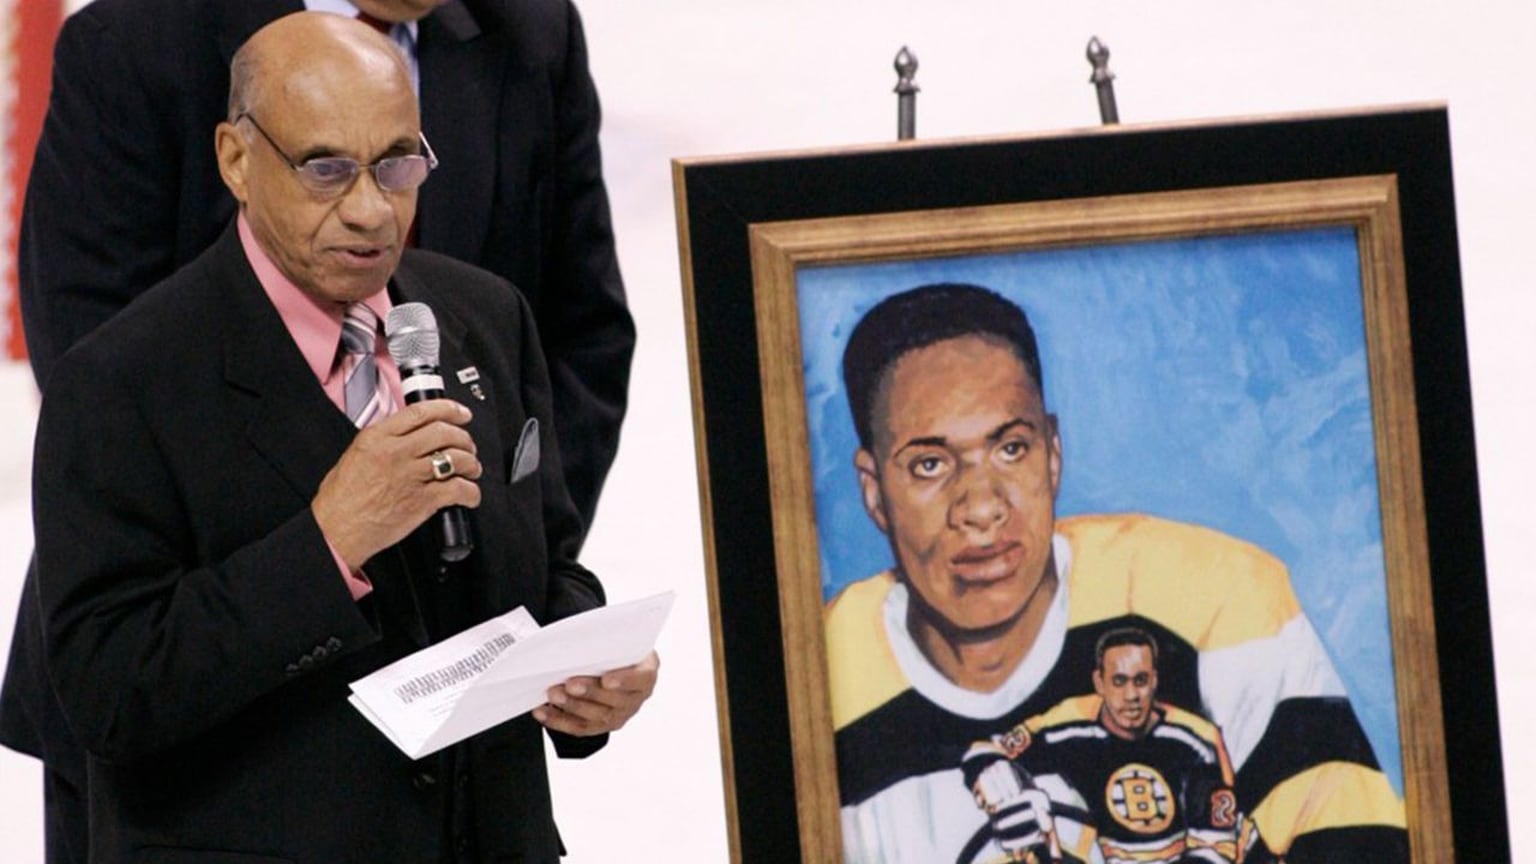 Willie O'Ree 'overwhelmed' as Boston Bruins retire jersey number